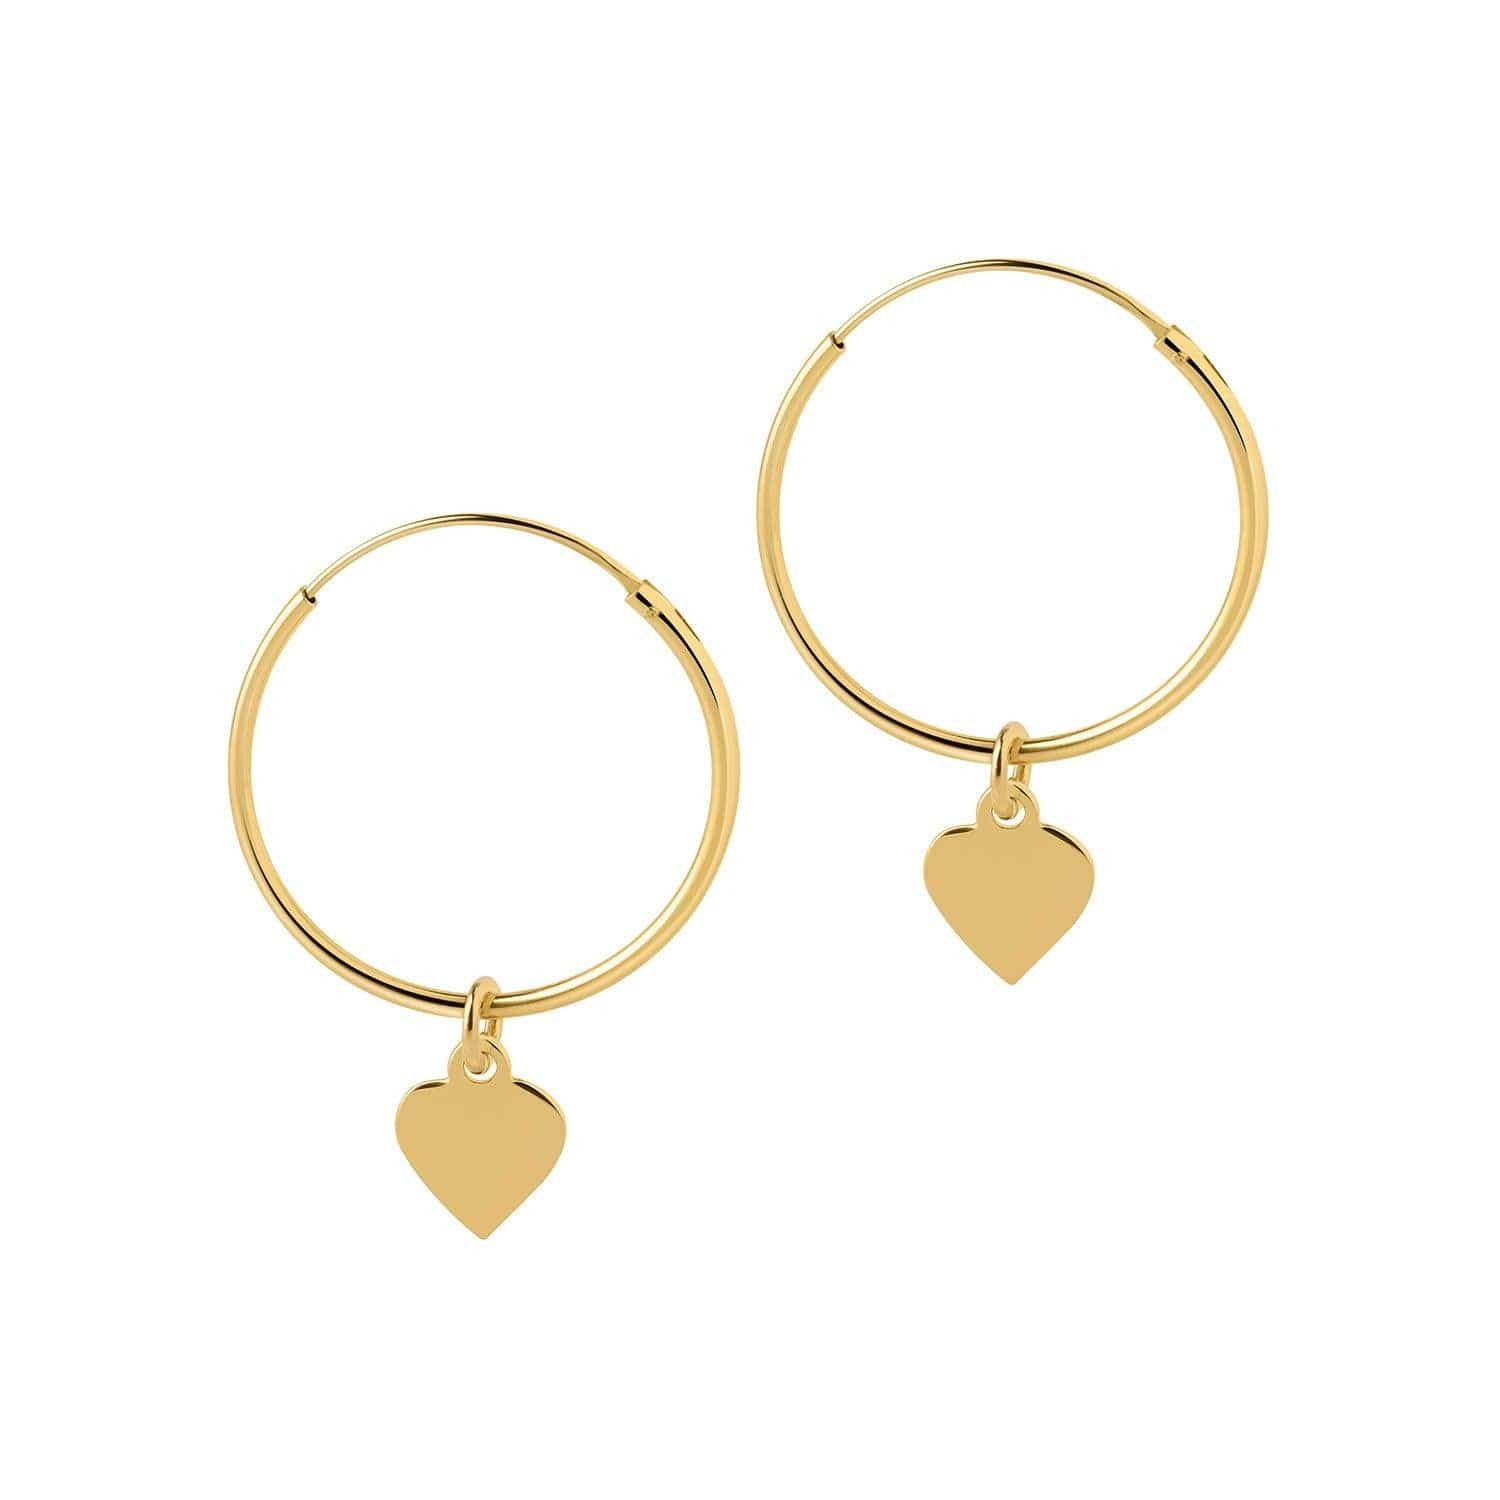 Hoop Earrings with Pendant Heart Gold Plated 22 MM